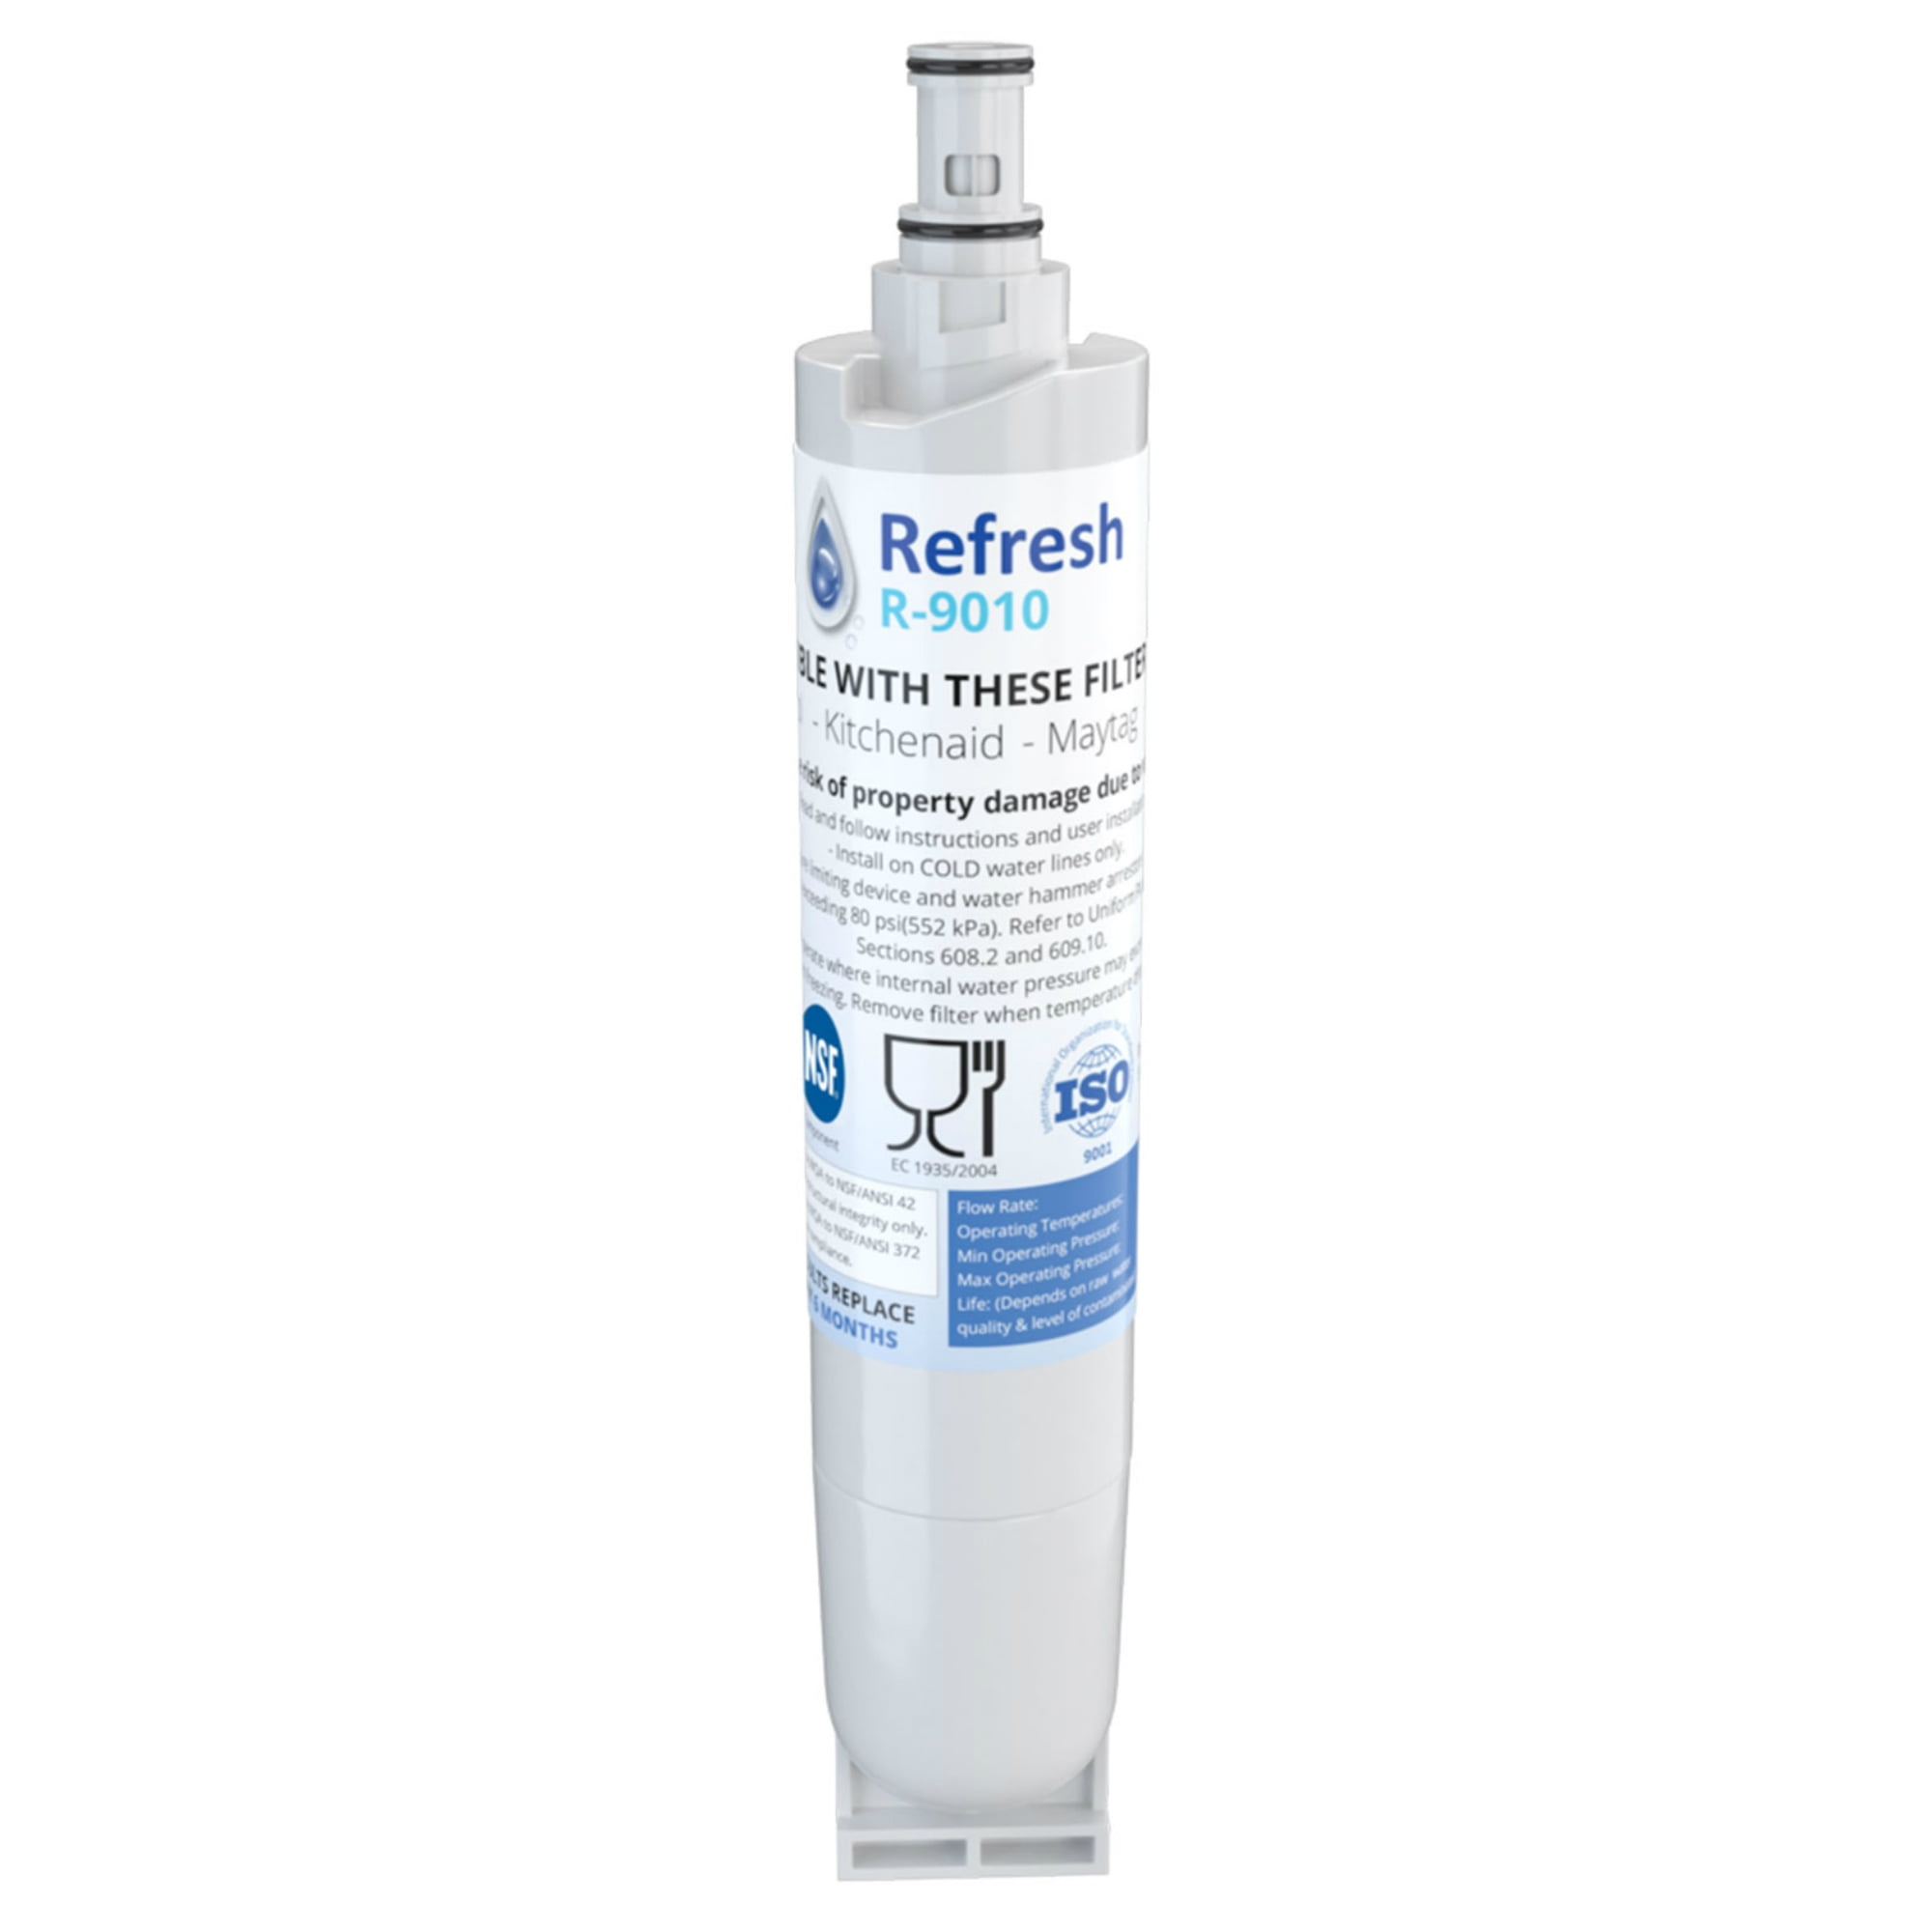 Refresh Replacement Water Filter Fits Whirlpool 4396510 Refrigerators 4 Pack 